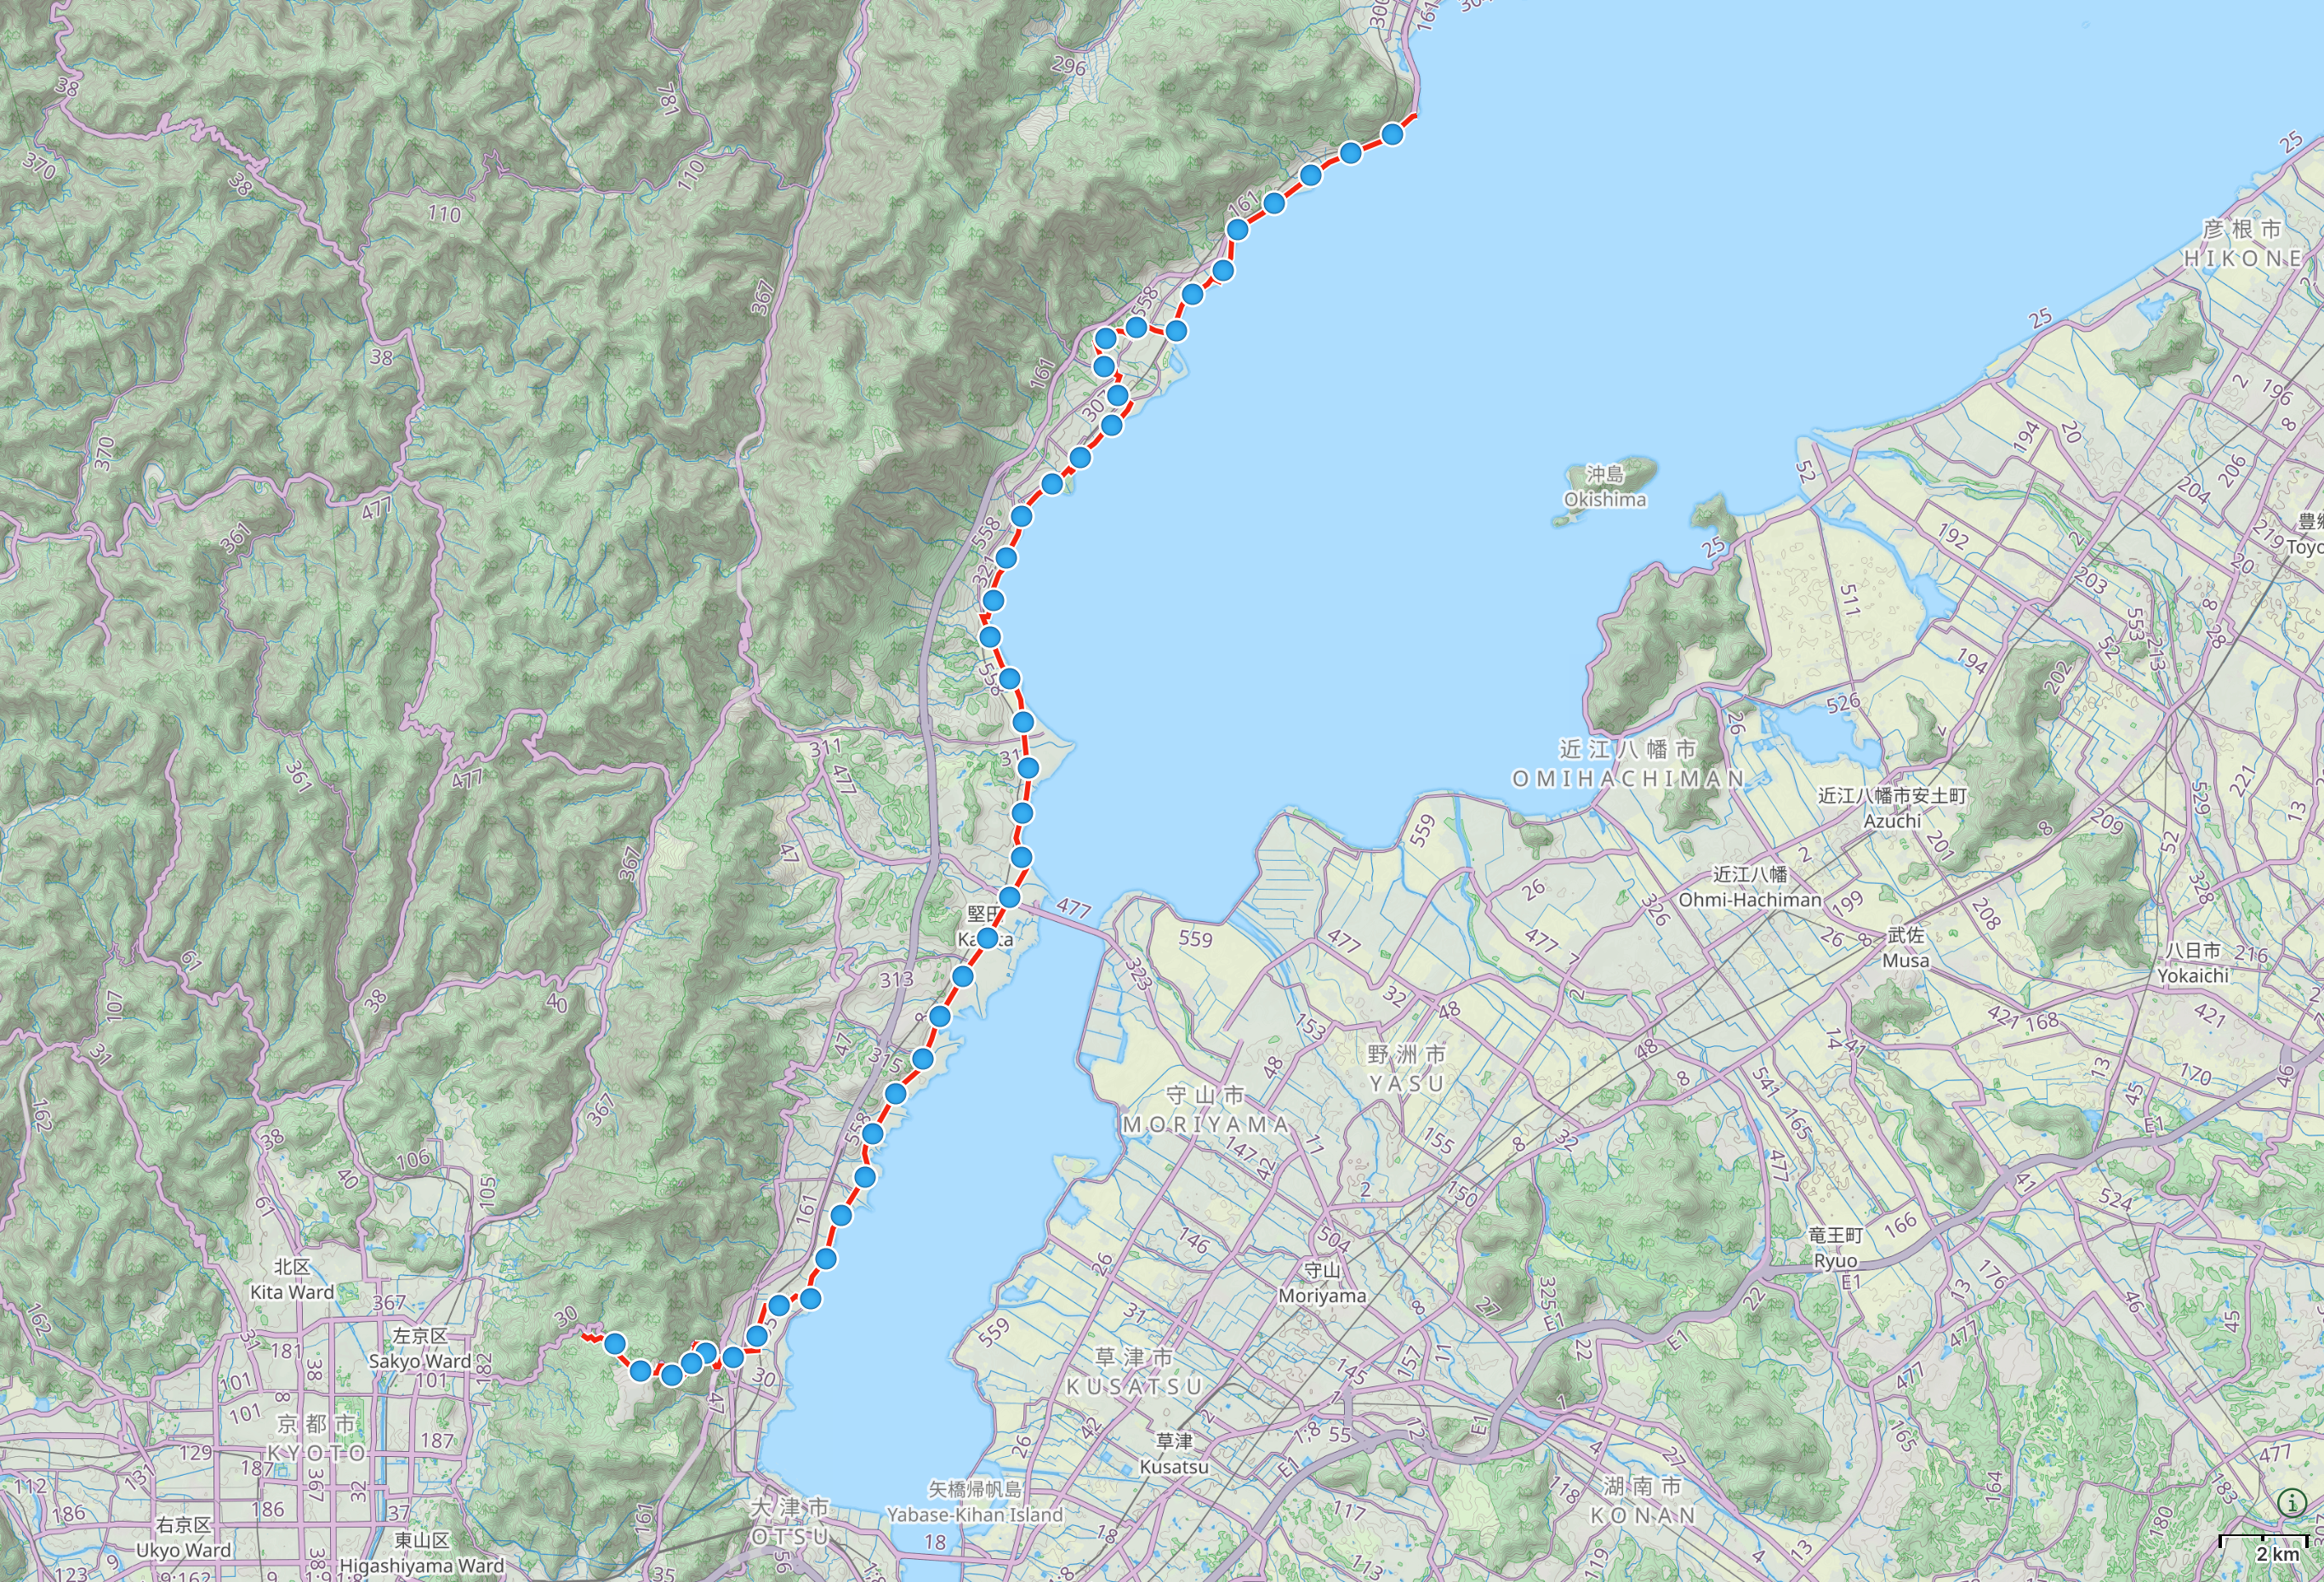 Map of the Lake Biwa area with route between Otsu, Shiga and Shirahige Shrine highlighted.